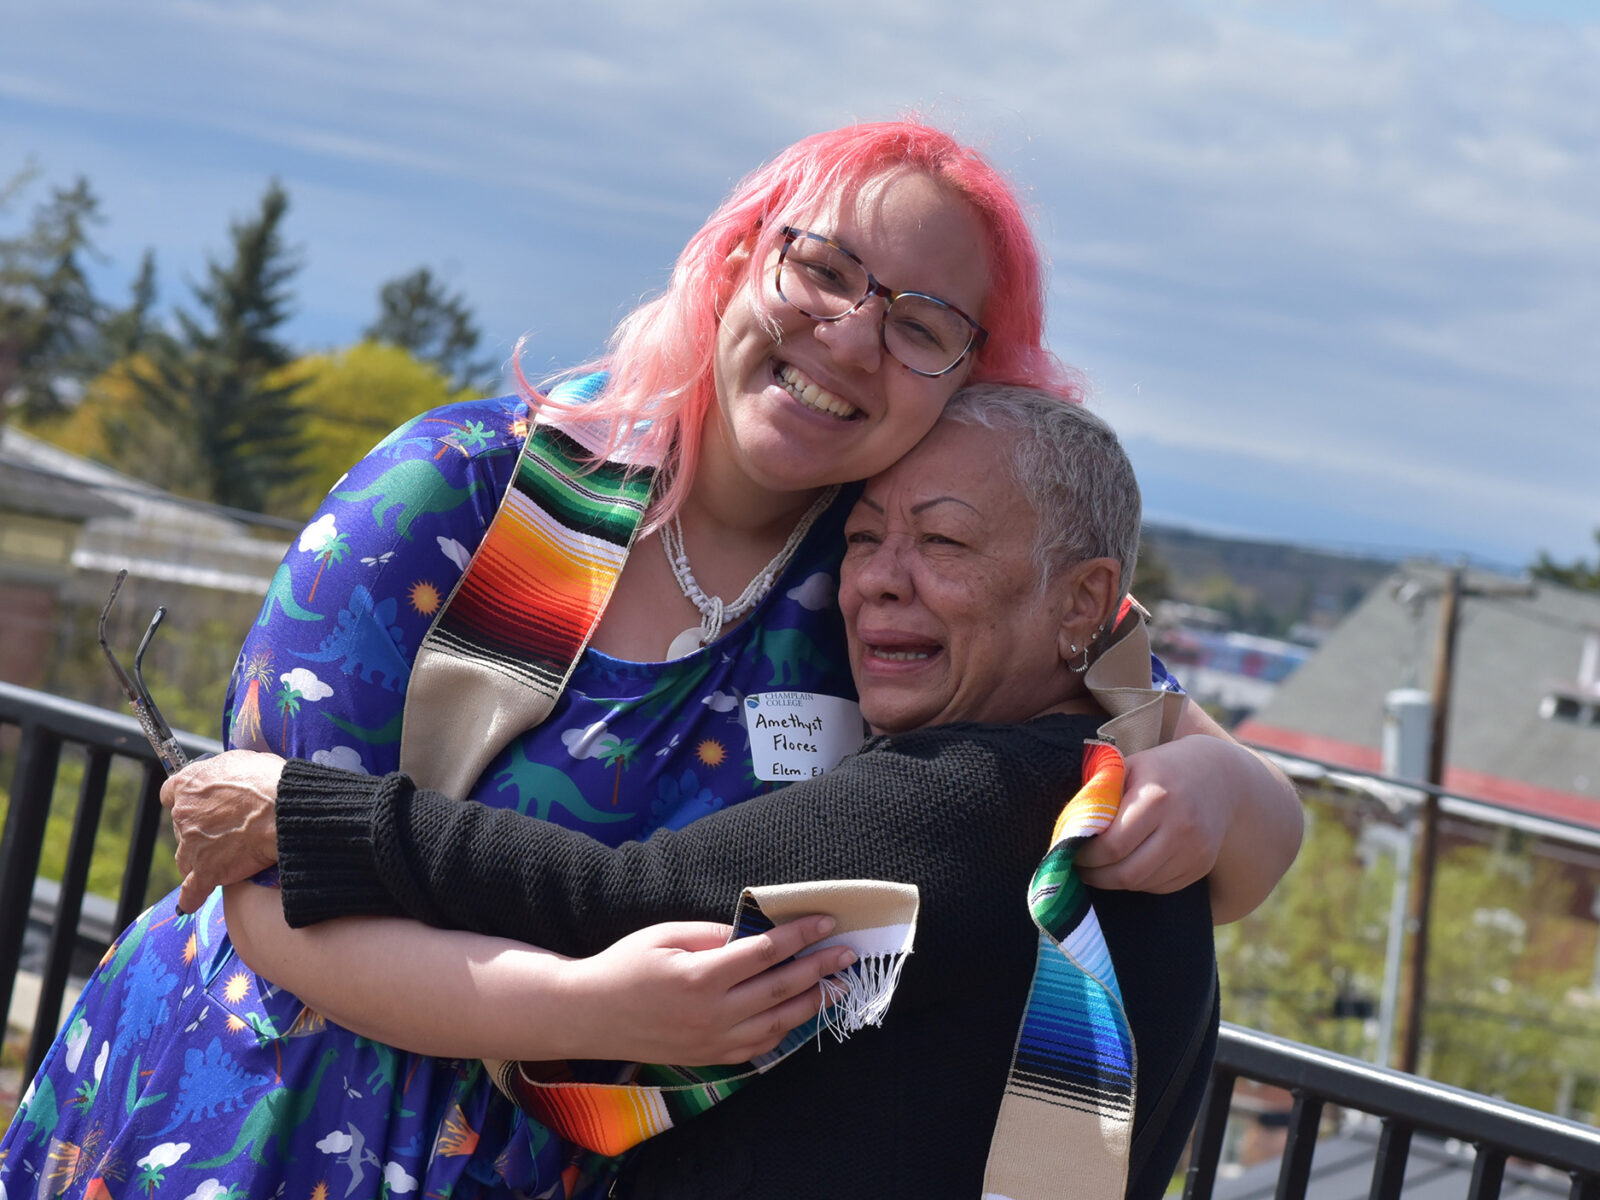 student with pink hair and commencement stole hugs other family member, all smiles